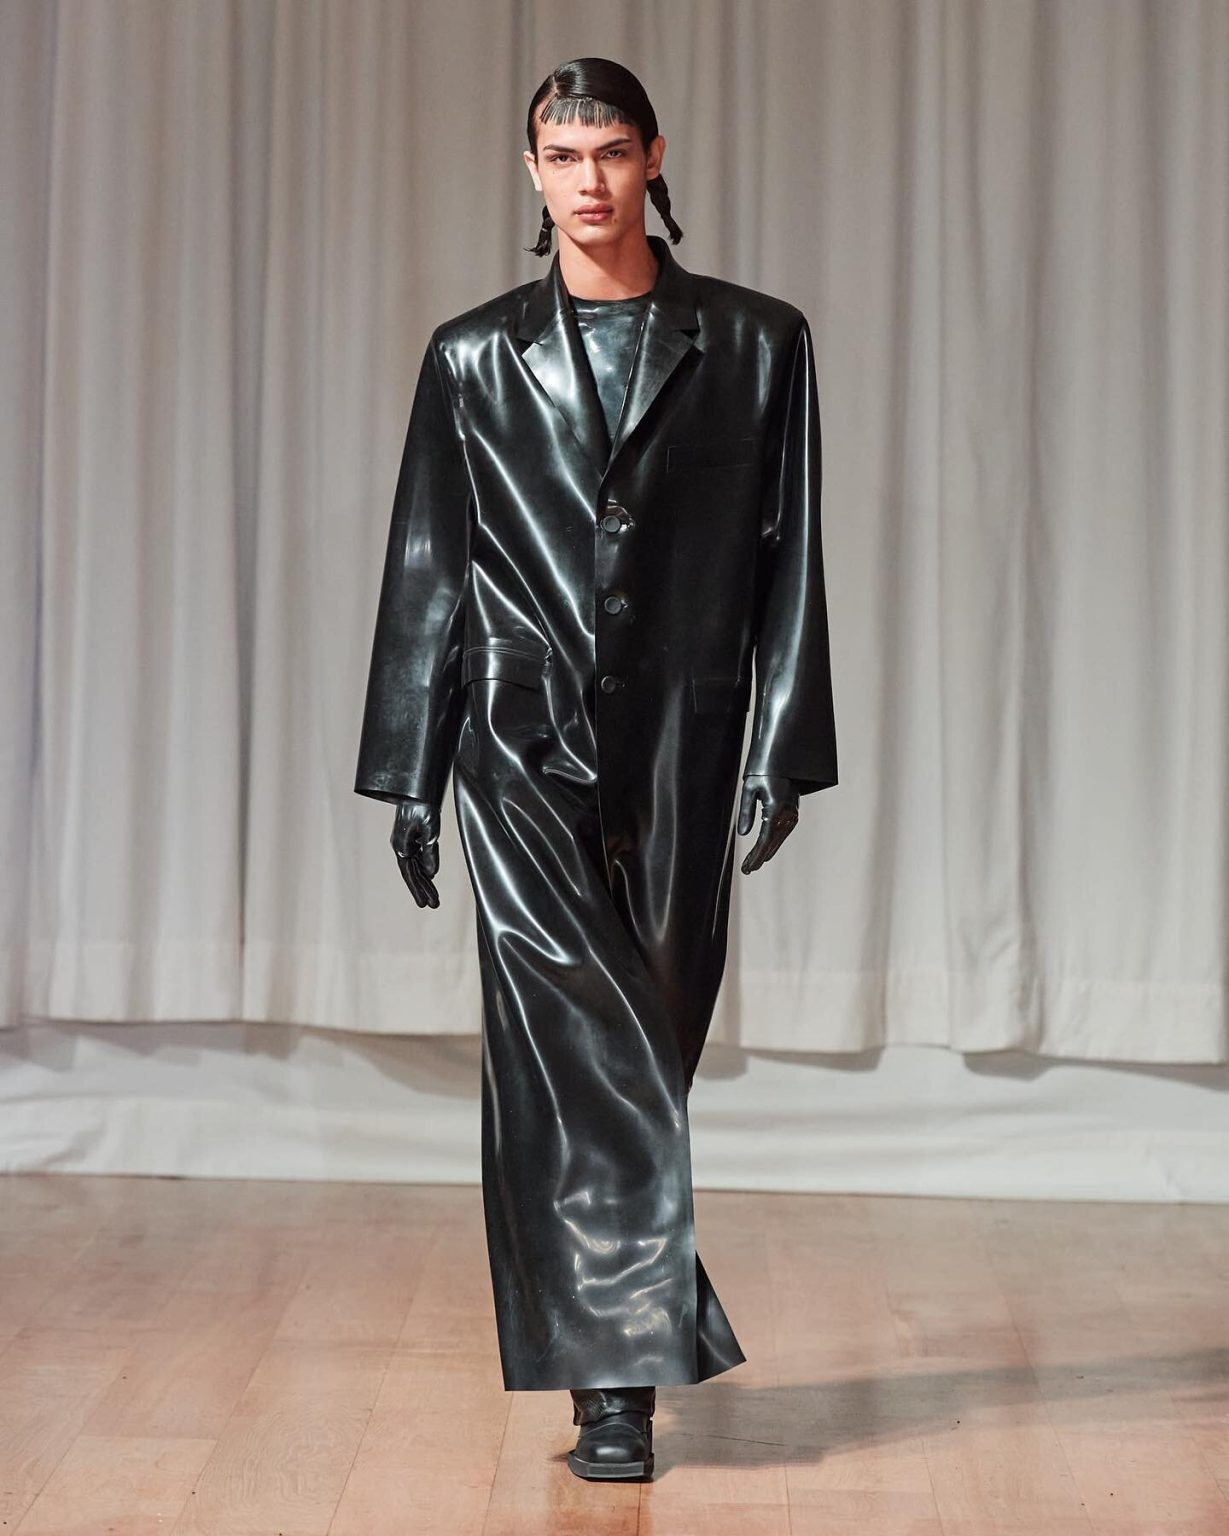 AVELLANO Launches FW23 Collection at Paris Fashion Week